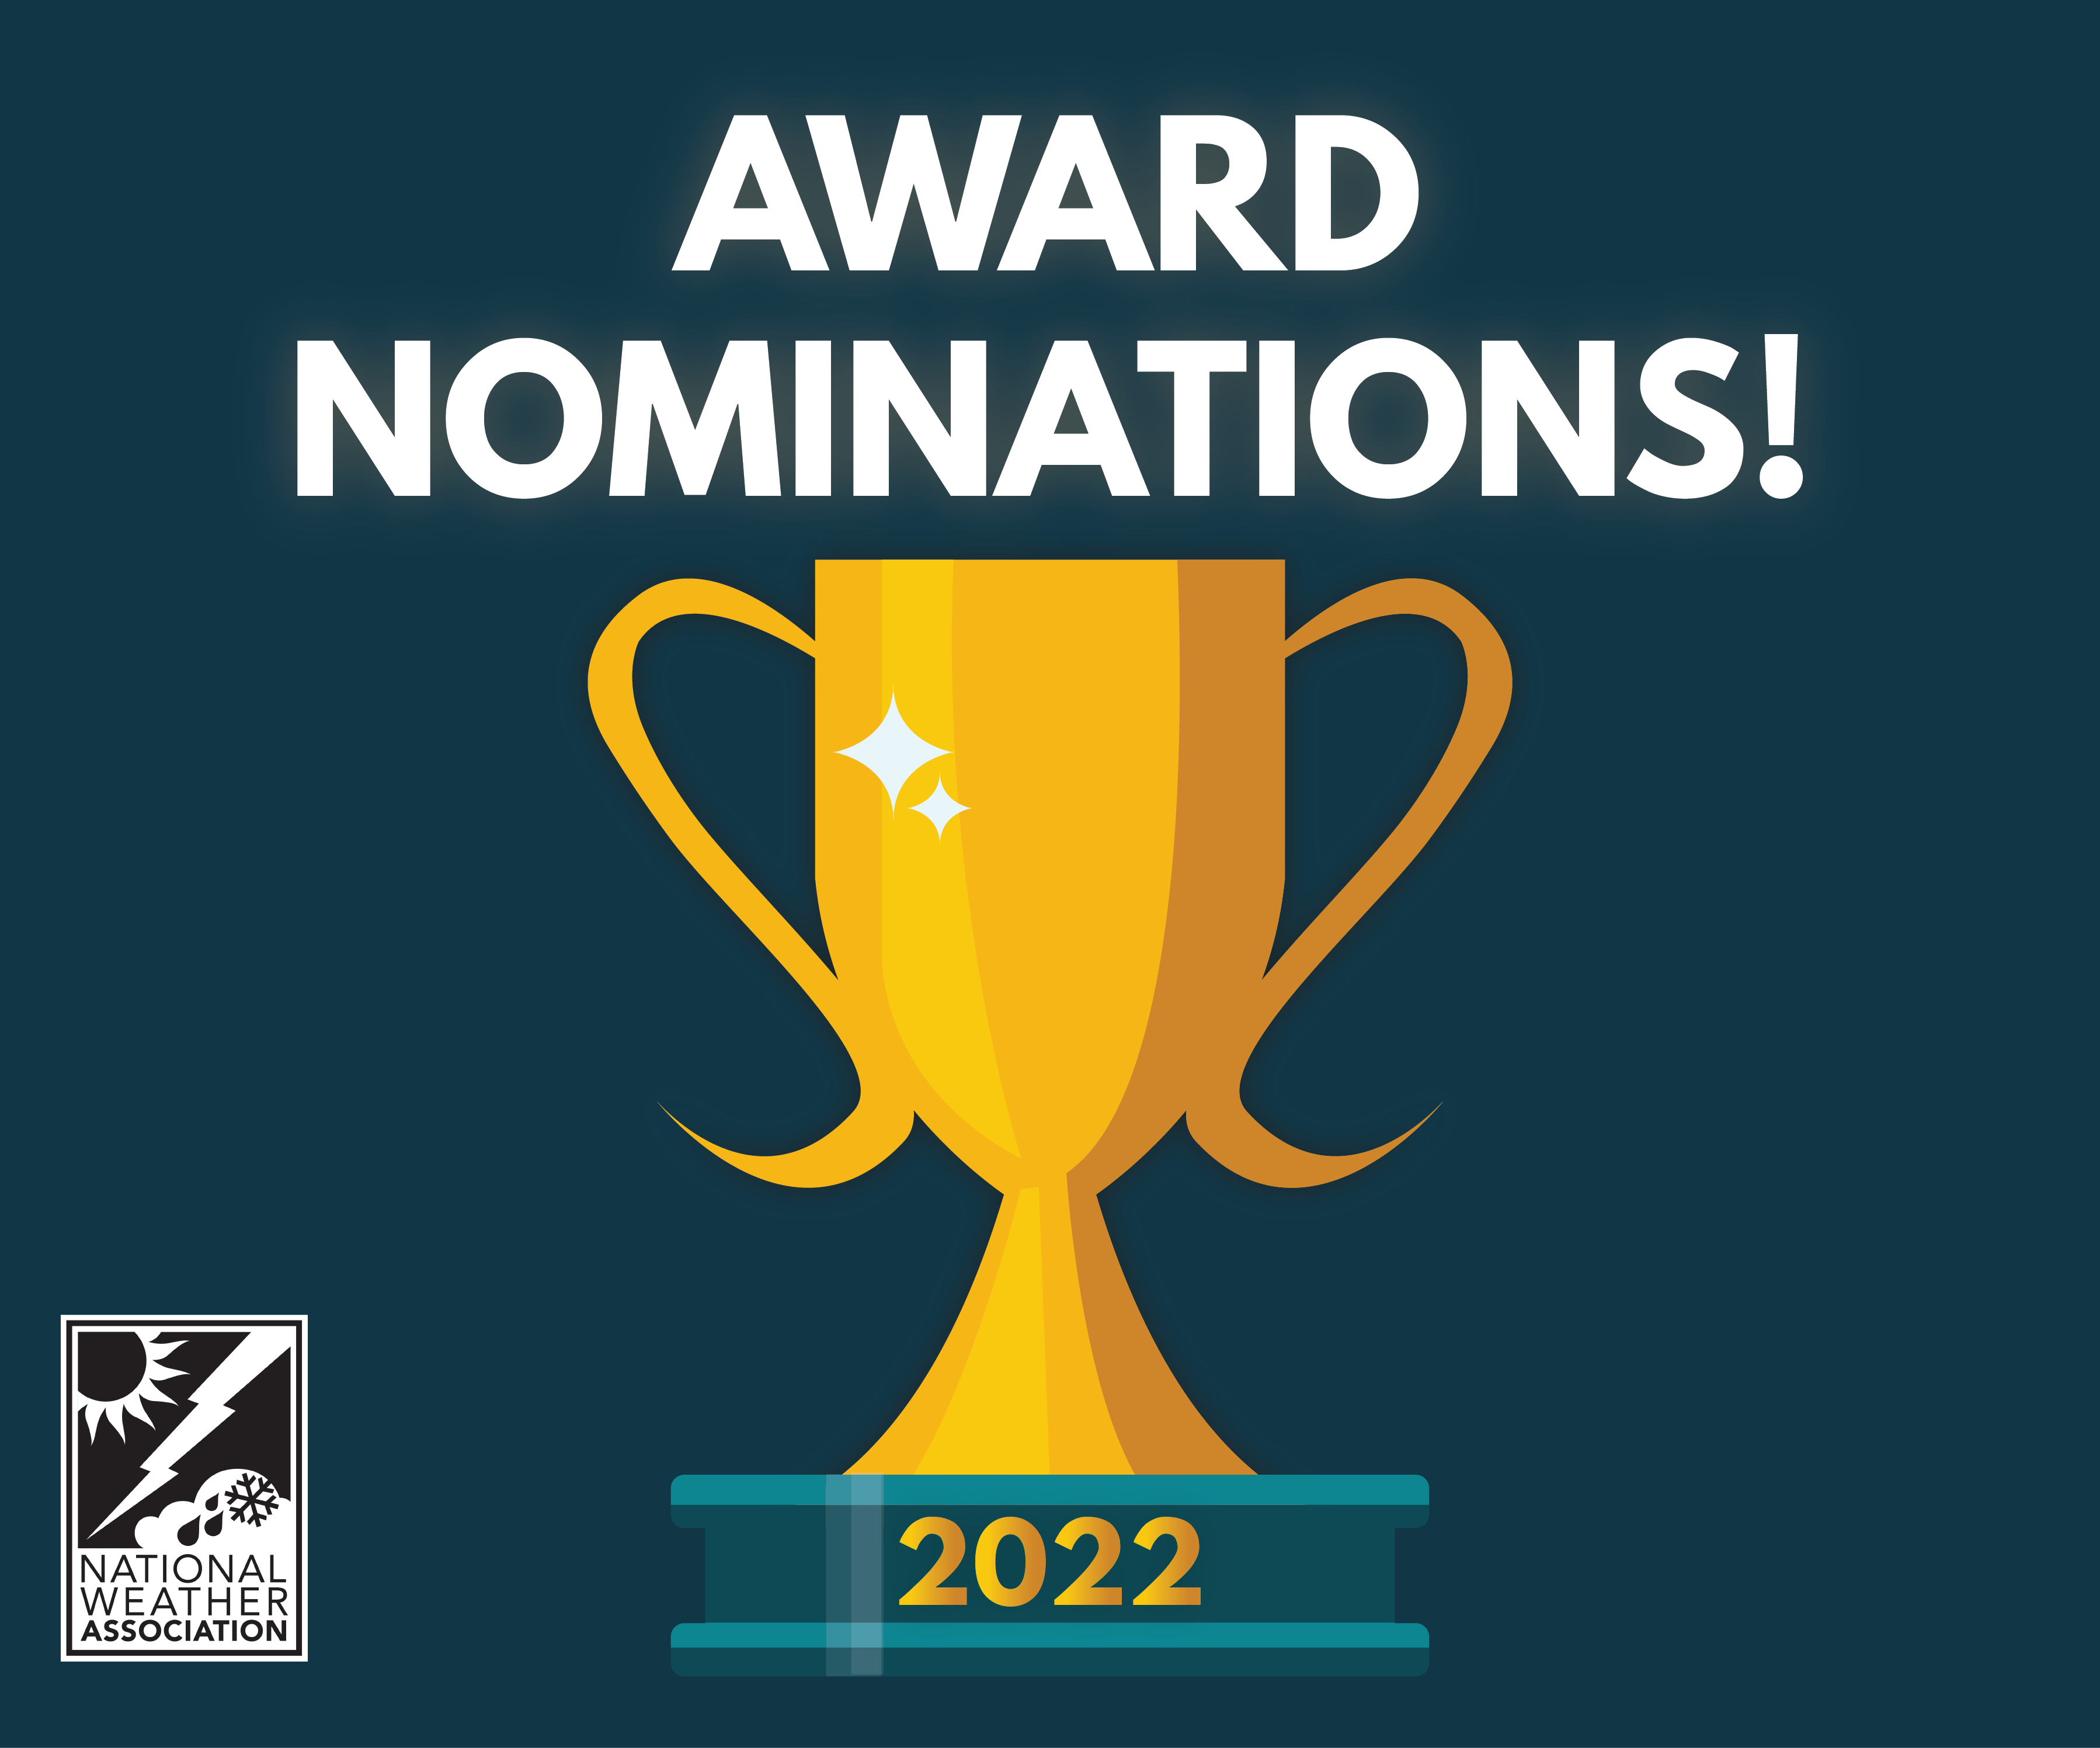 A graphic promoting NWA Award Nominations for 2022. 